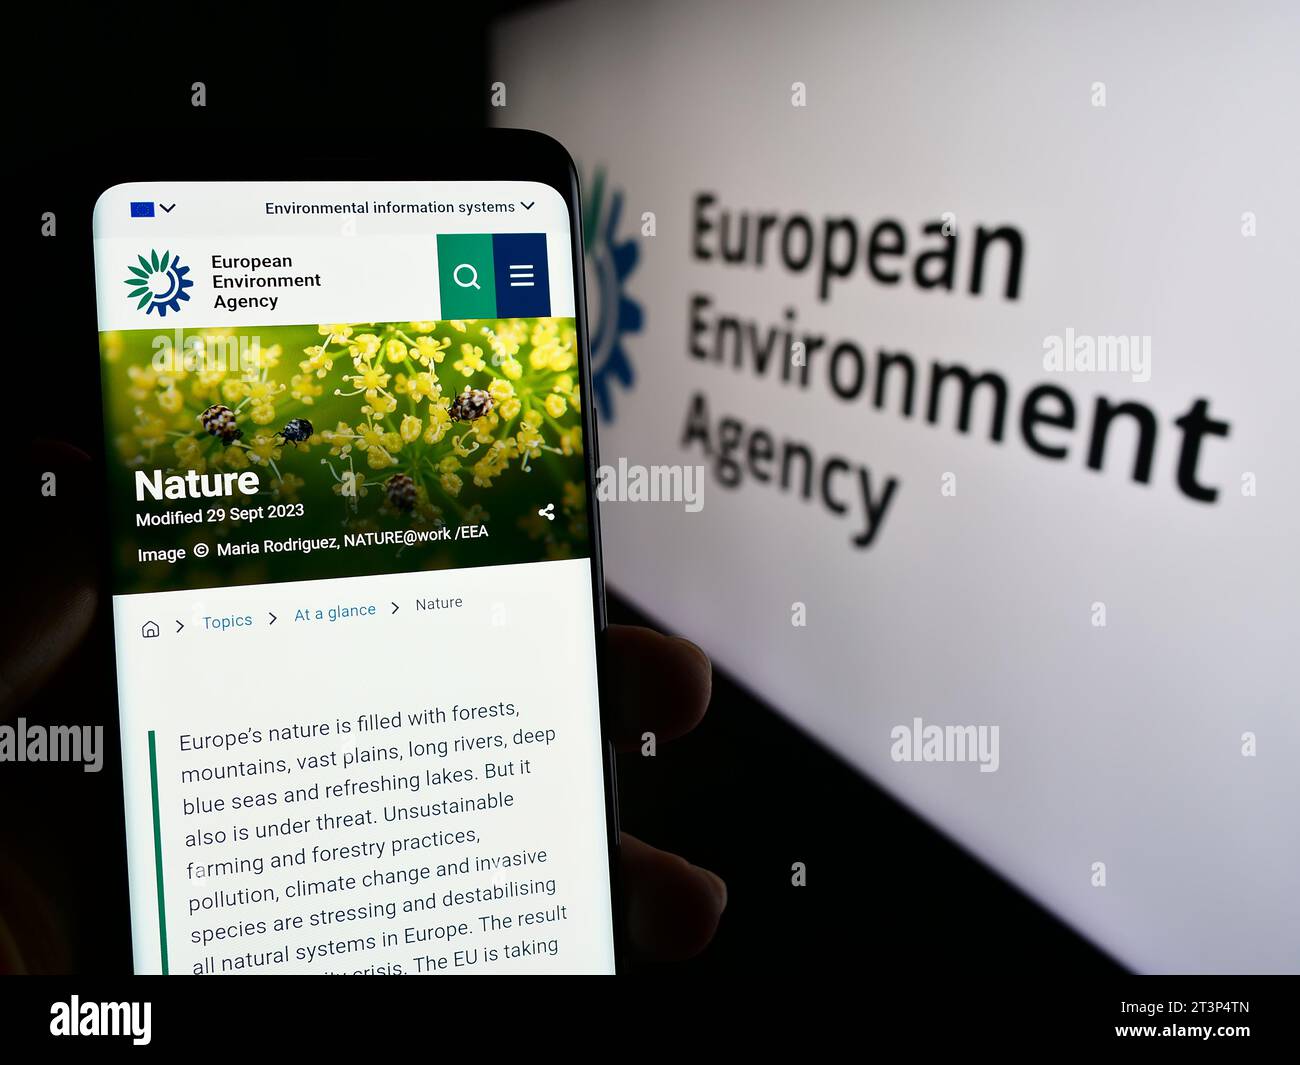 Person holding smartphone with web page of EU institution European Environment Agency (EEA) in front of logo. Focus on center of phone display. Stock Photo